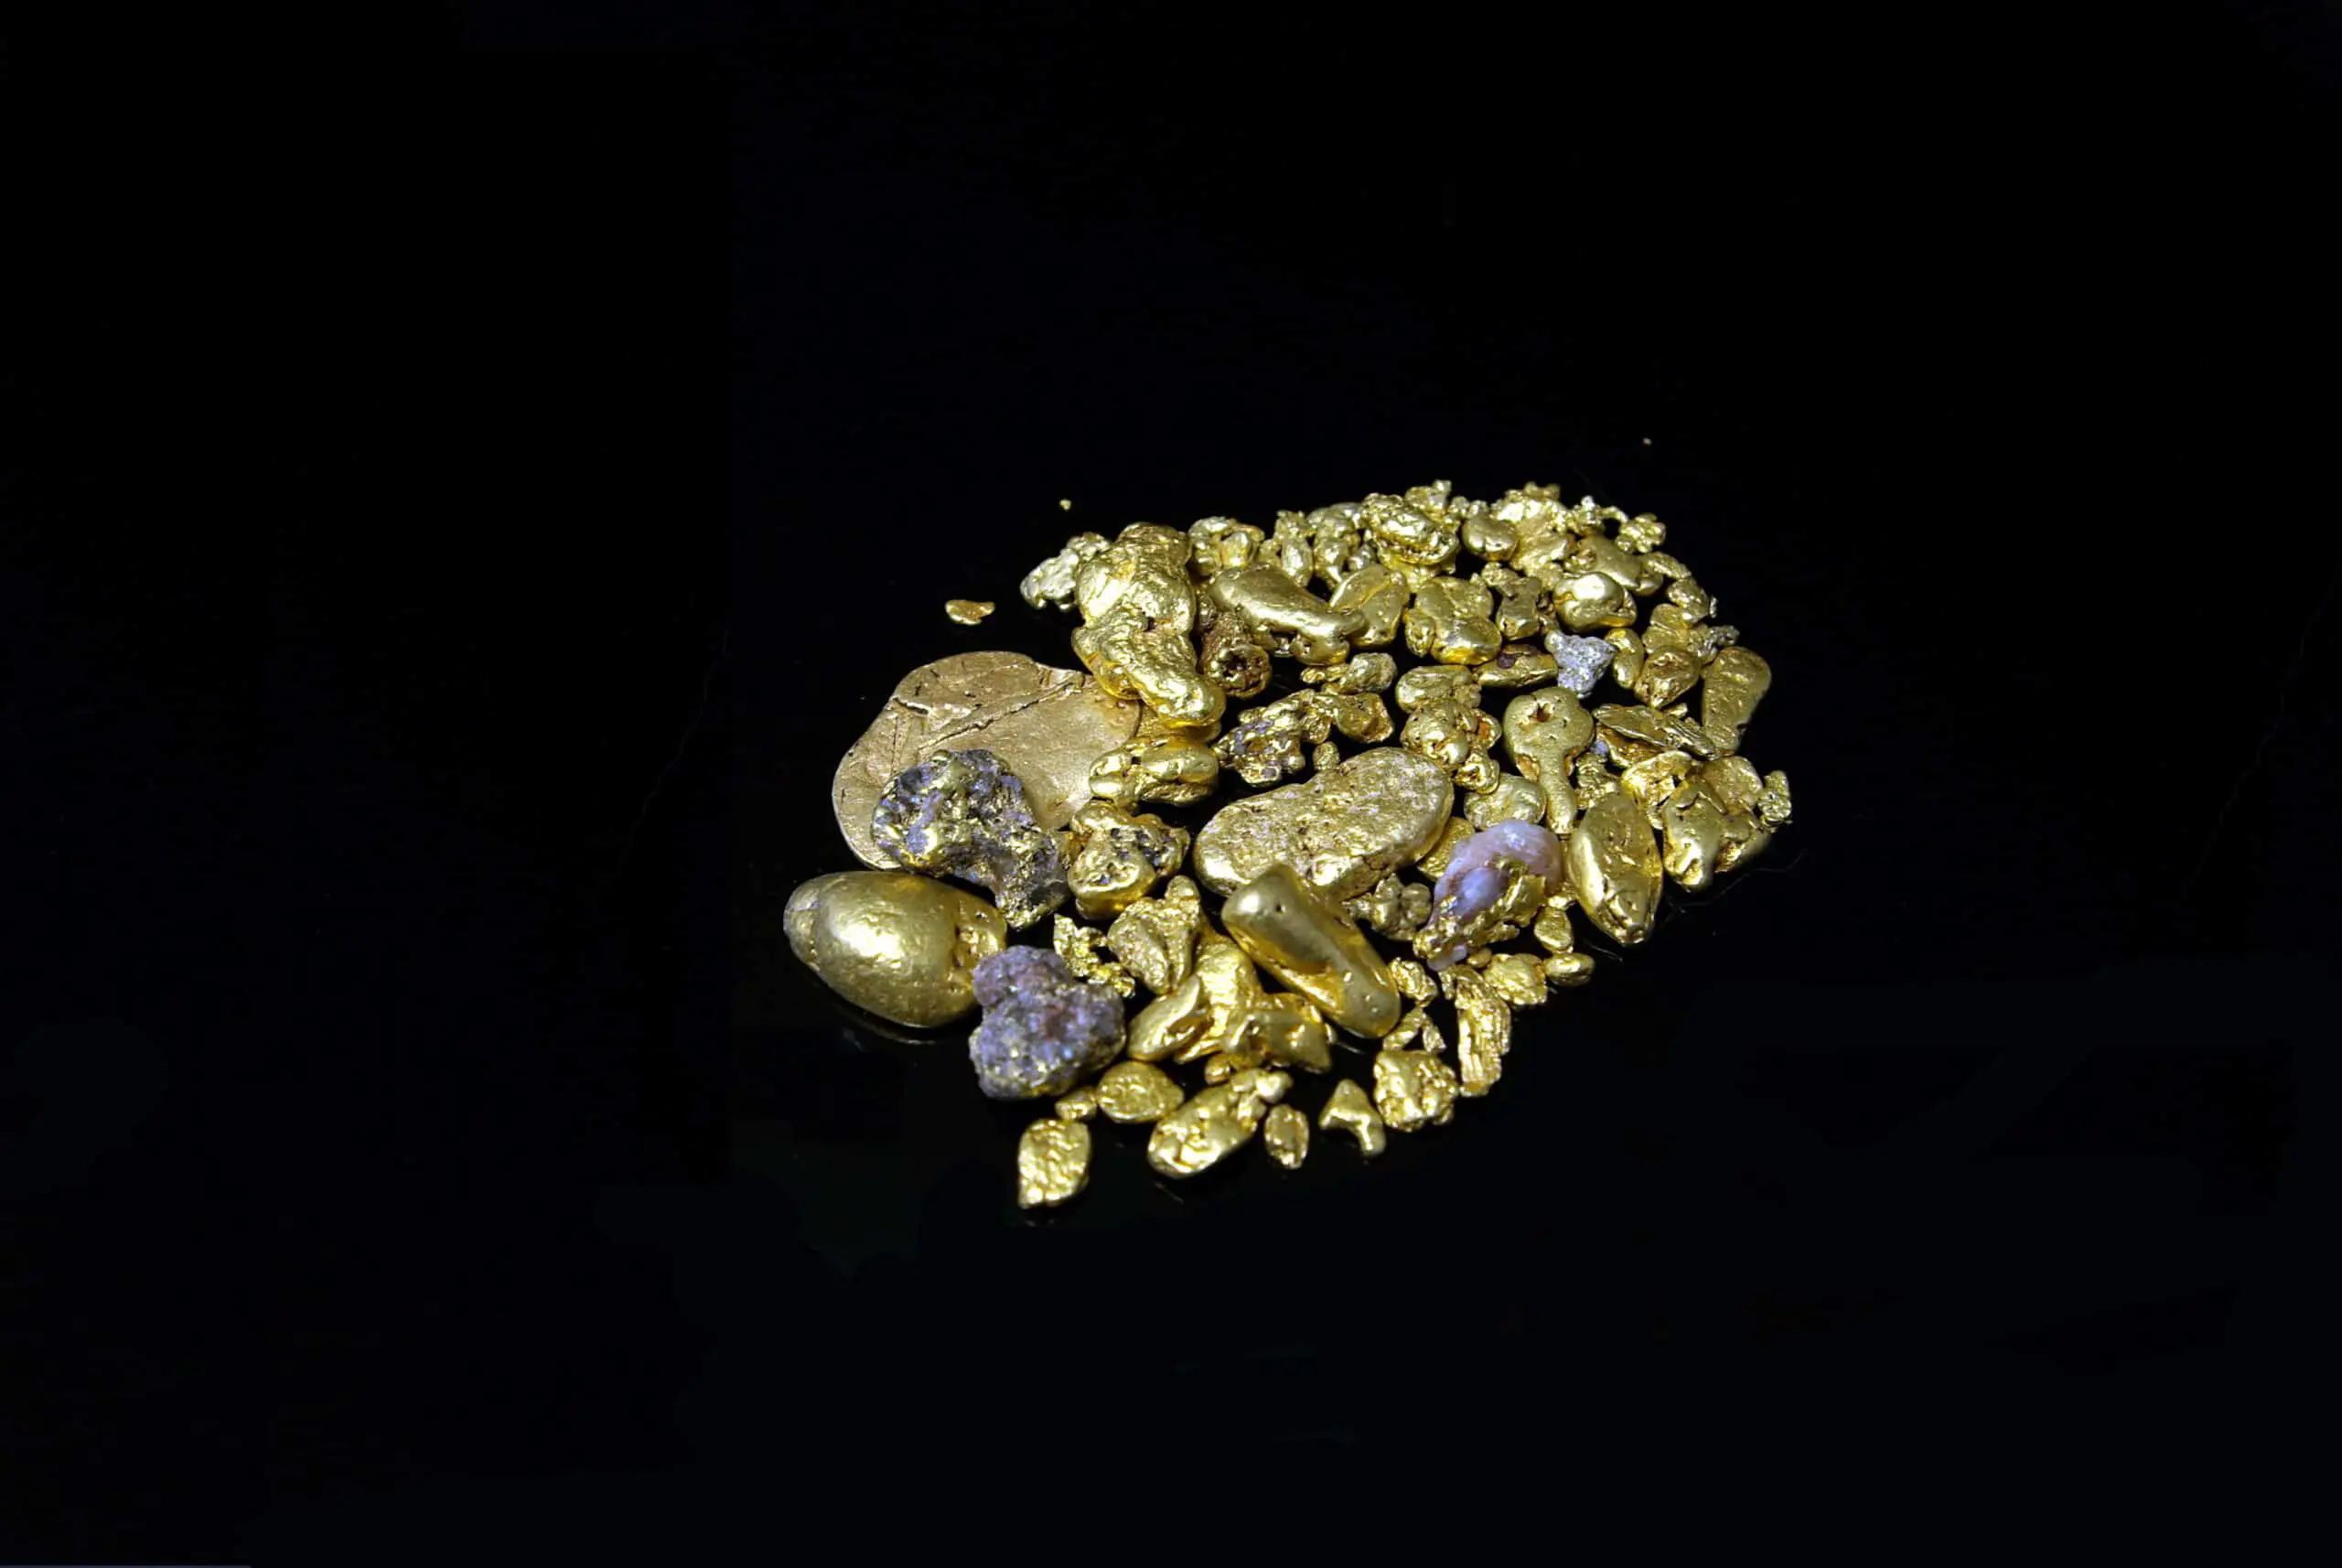 Gold nuggets, flakes and dust mined from the creeks and rivers of California